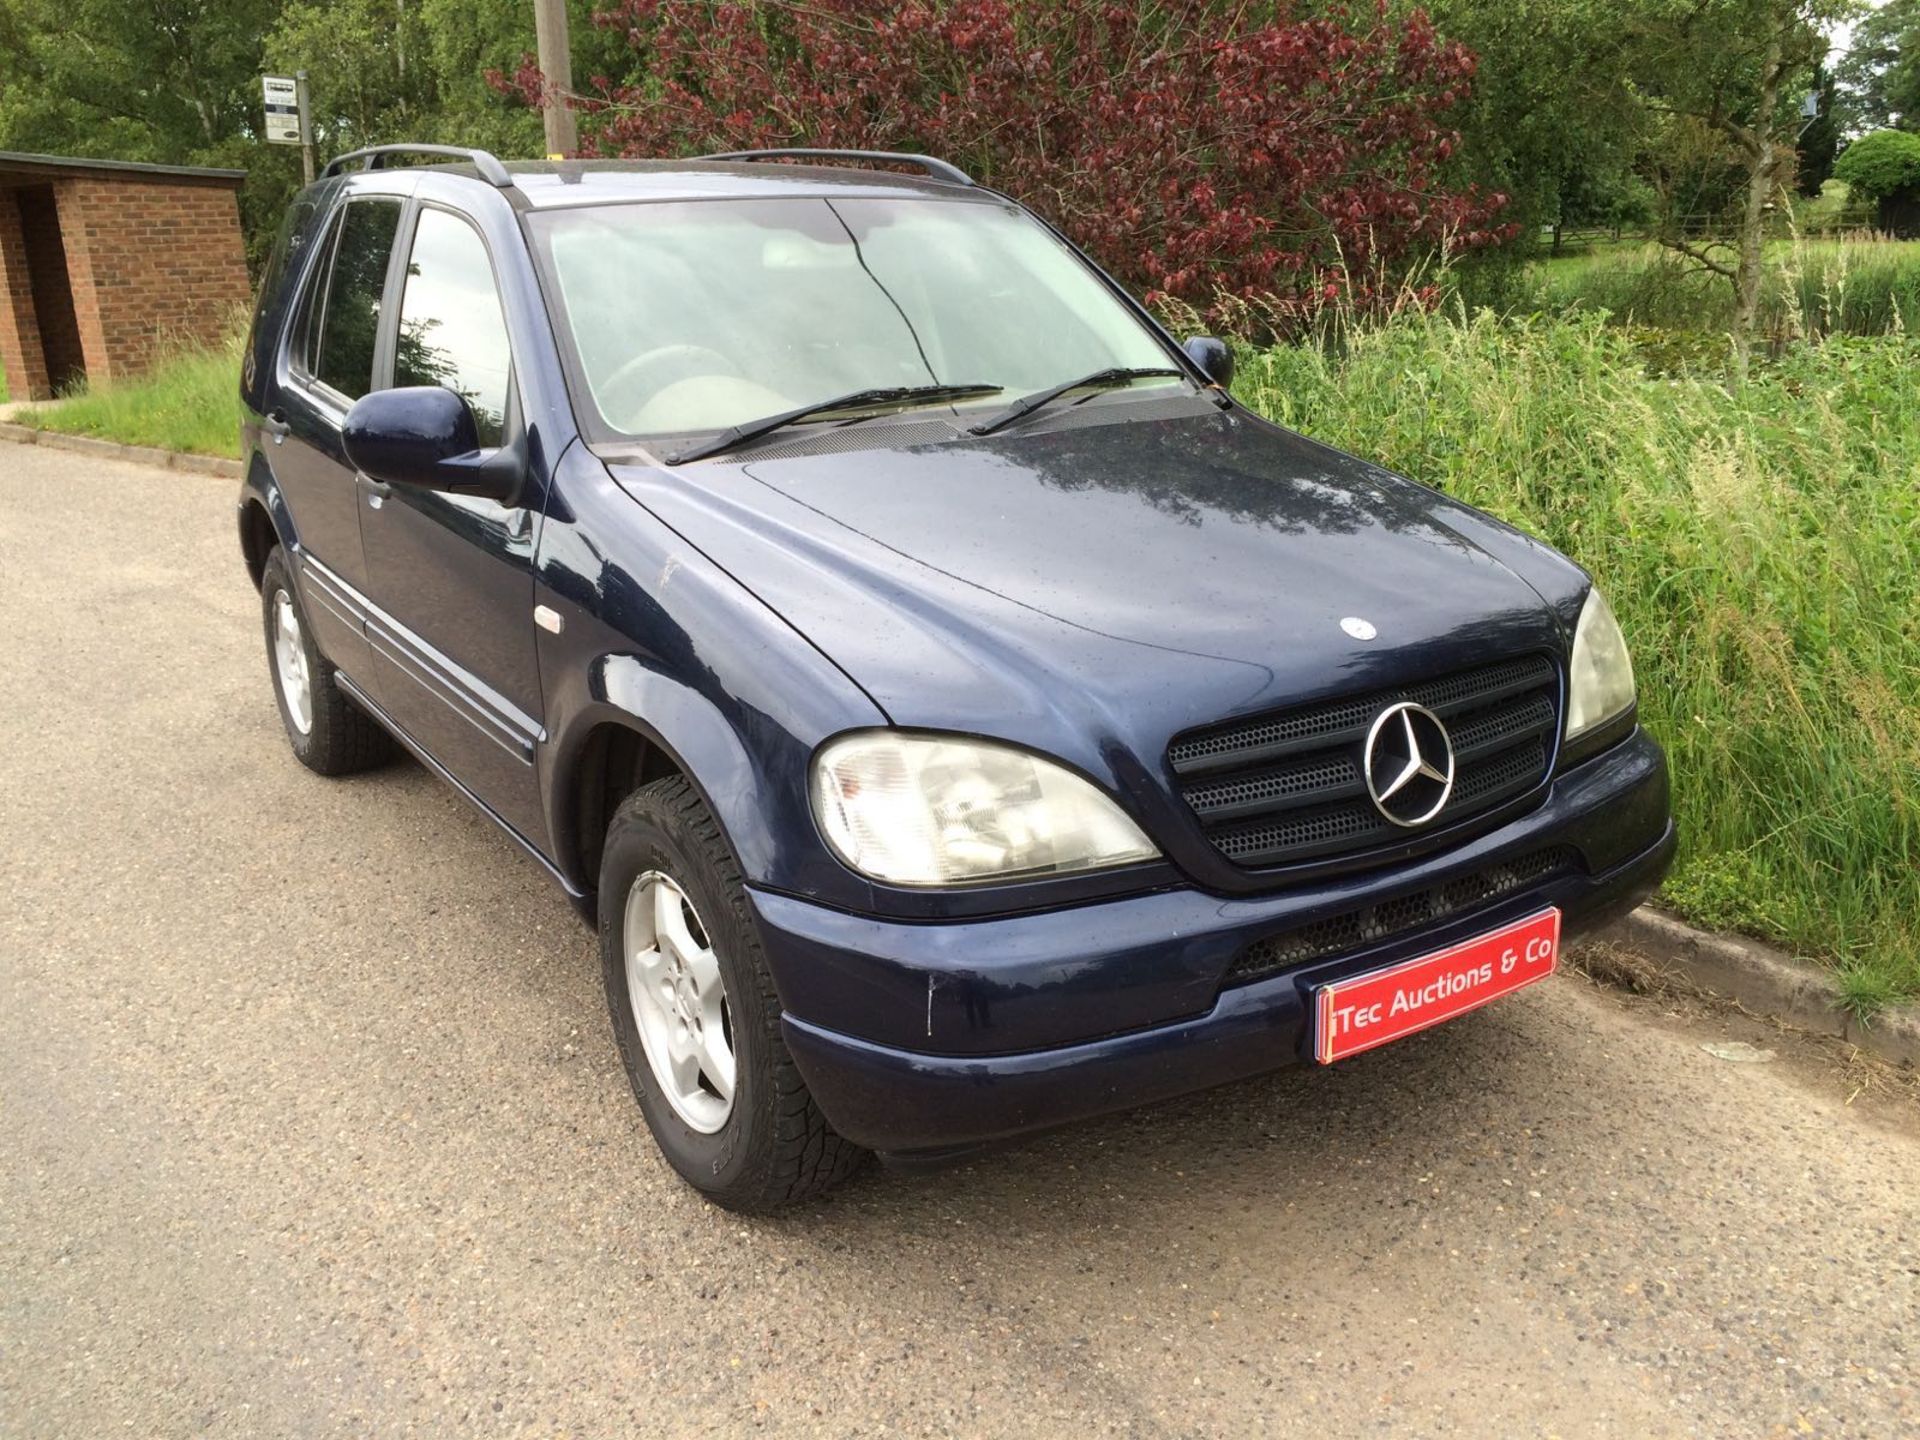 2000 MERCEDES BENZ ML270 CDI AUTO (7 SEATER) **NO VAT ON HAMMER PRICE** - Image 2 of 19